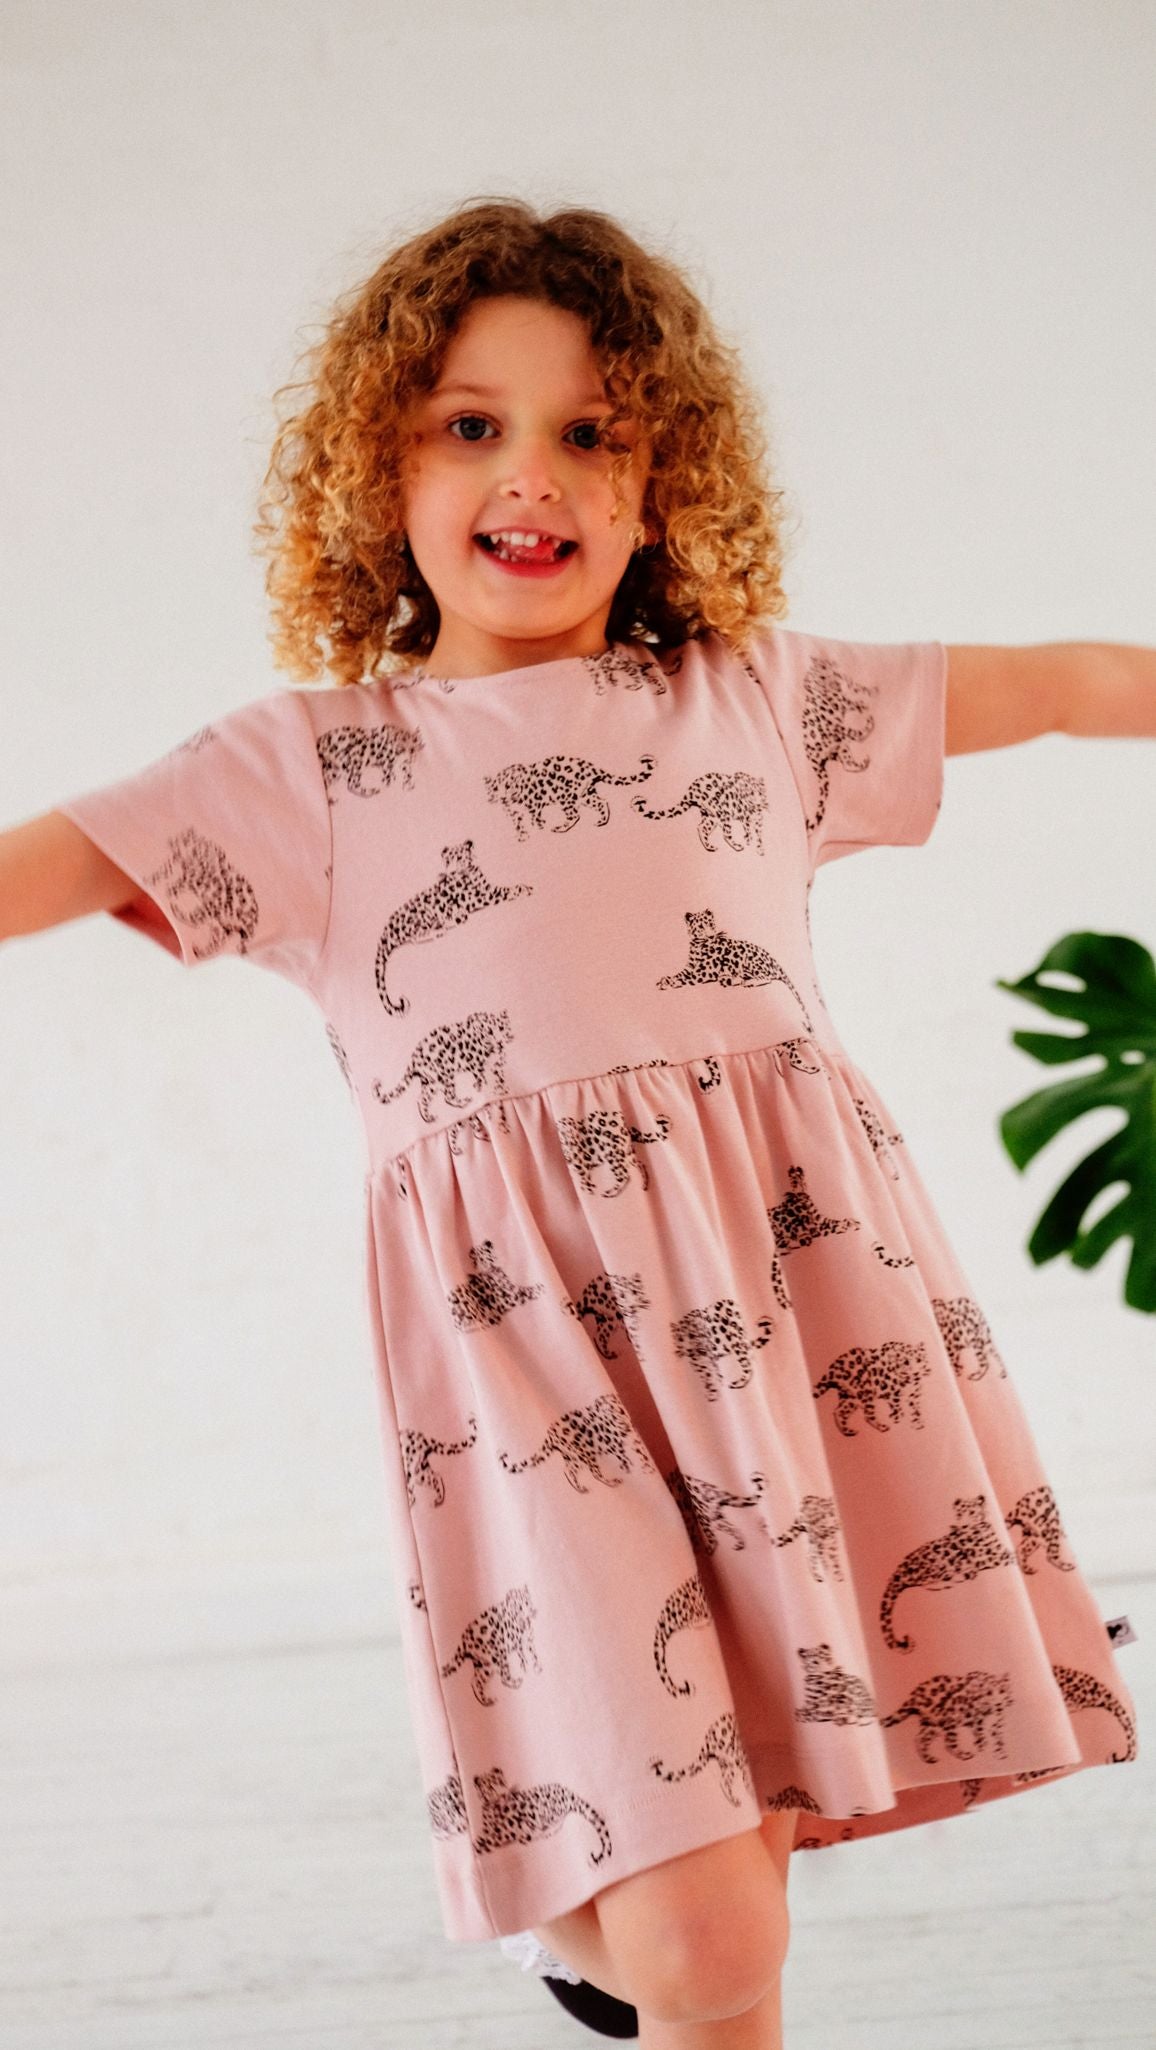 Load image into Gallery viewer, Lifestyle shot of girlwearing the leopard dress. She has curly hair and is holding her arms out to either side, facing the camera.
